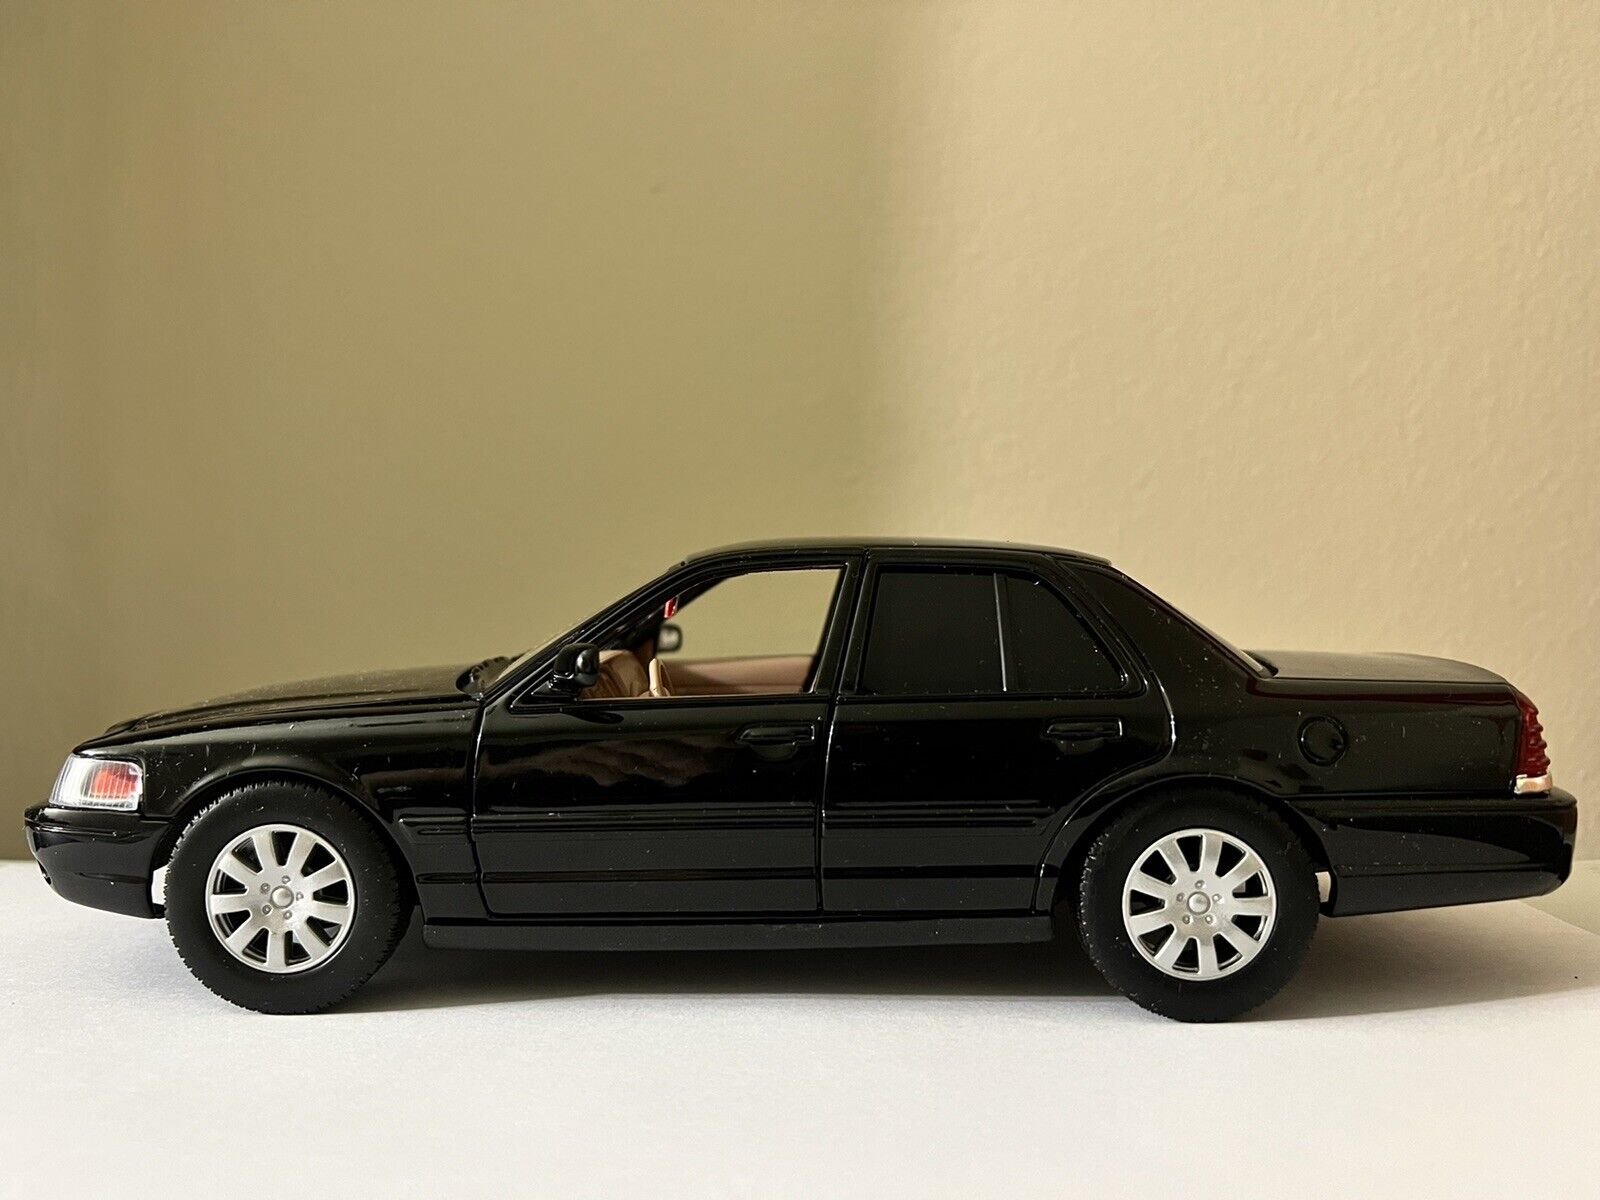 VERY RARE 1/24 Scale Ford Crown Victoria Black Unmarked Police Detective